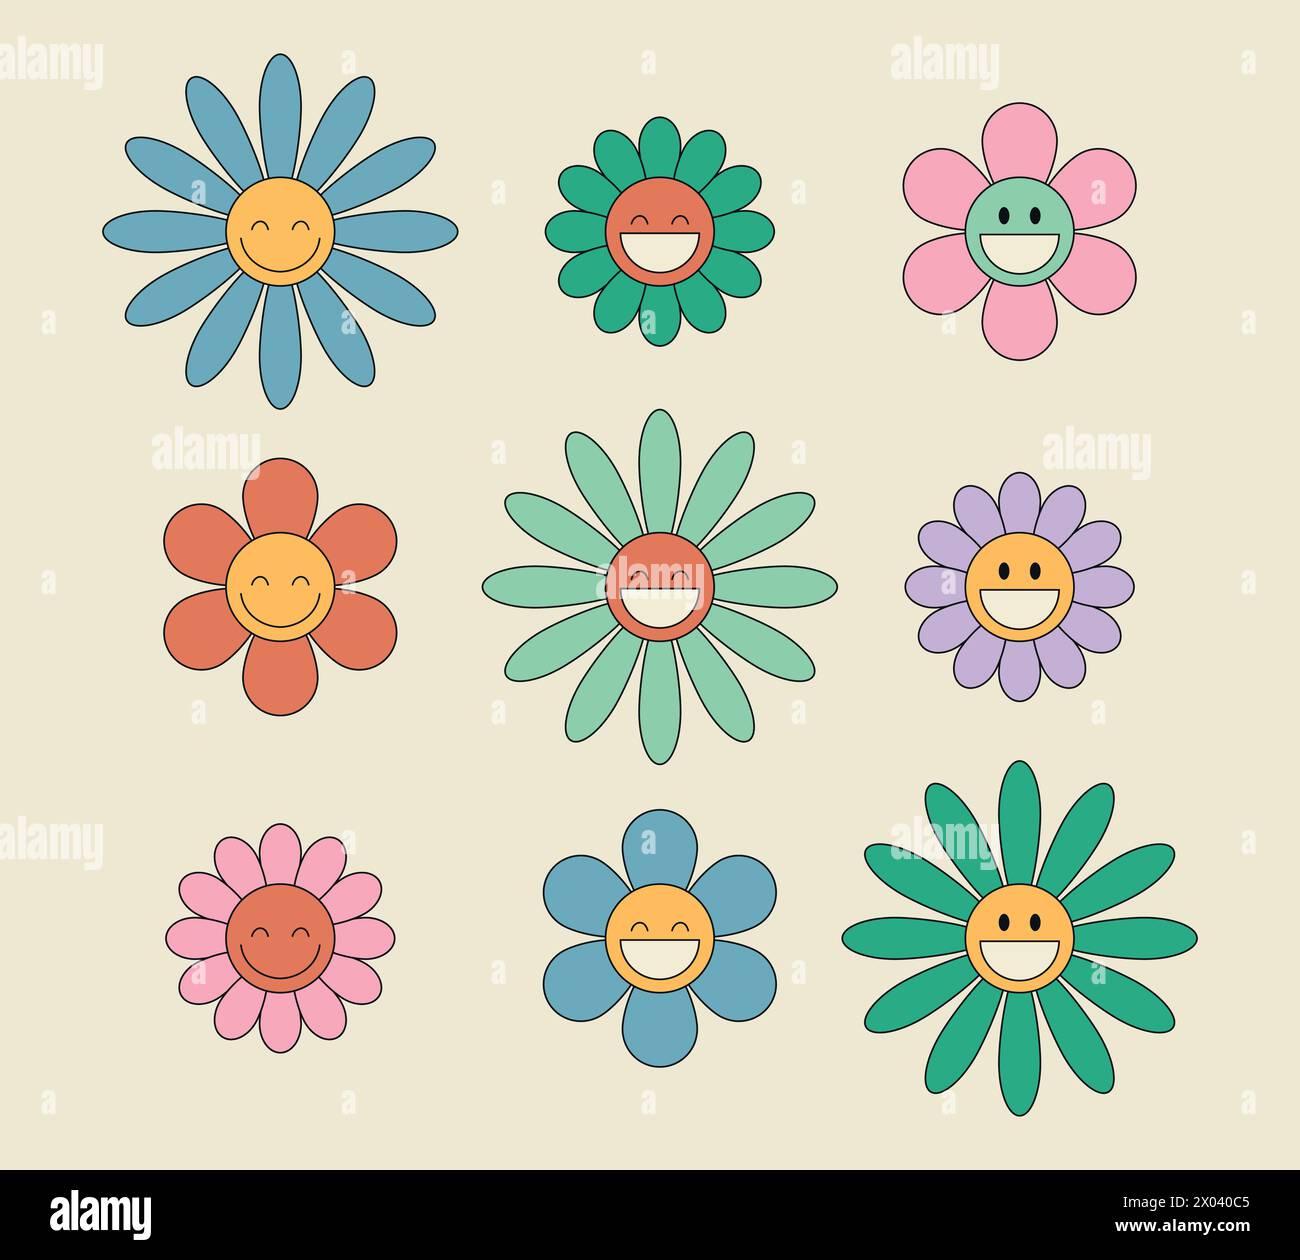 Groovy daisy flower characters set. Hippie retro style. Flower icons. Vector illustration Stock Vector